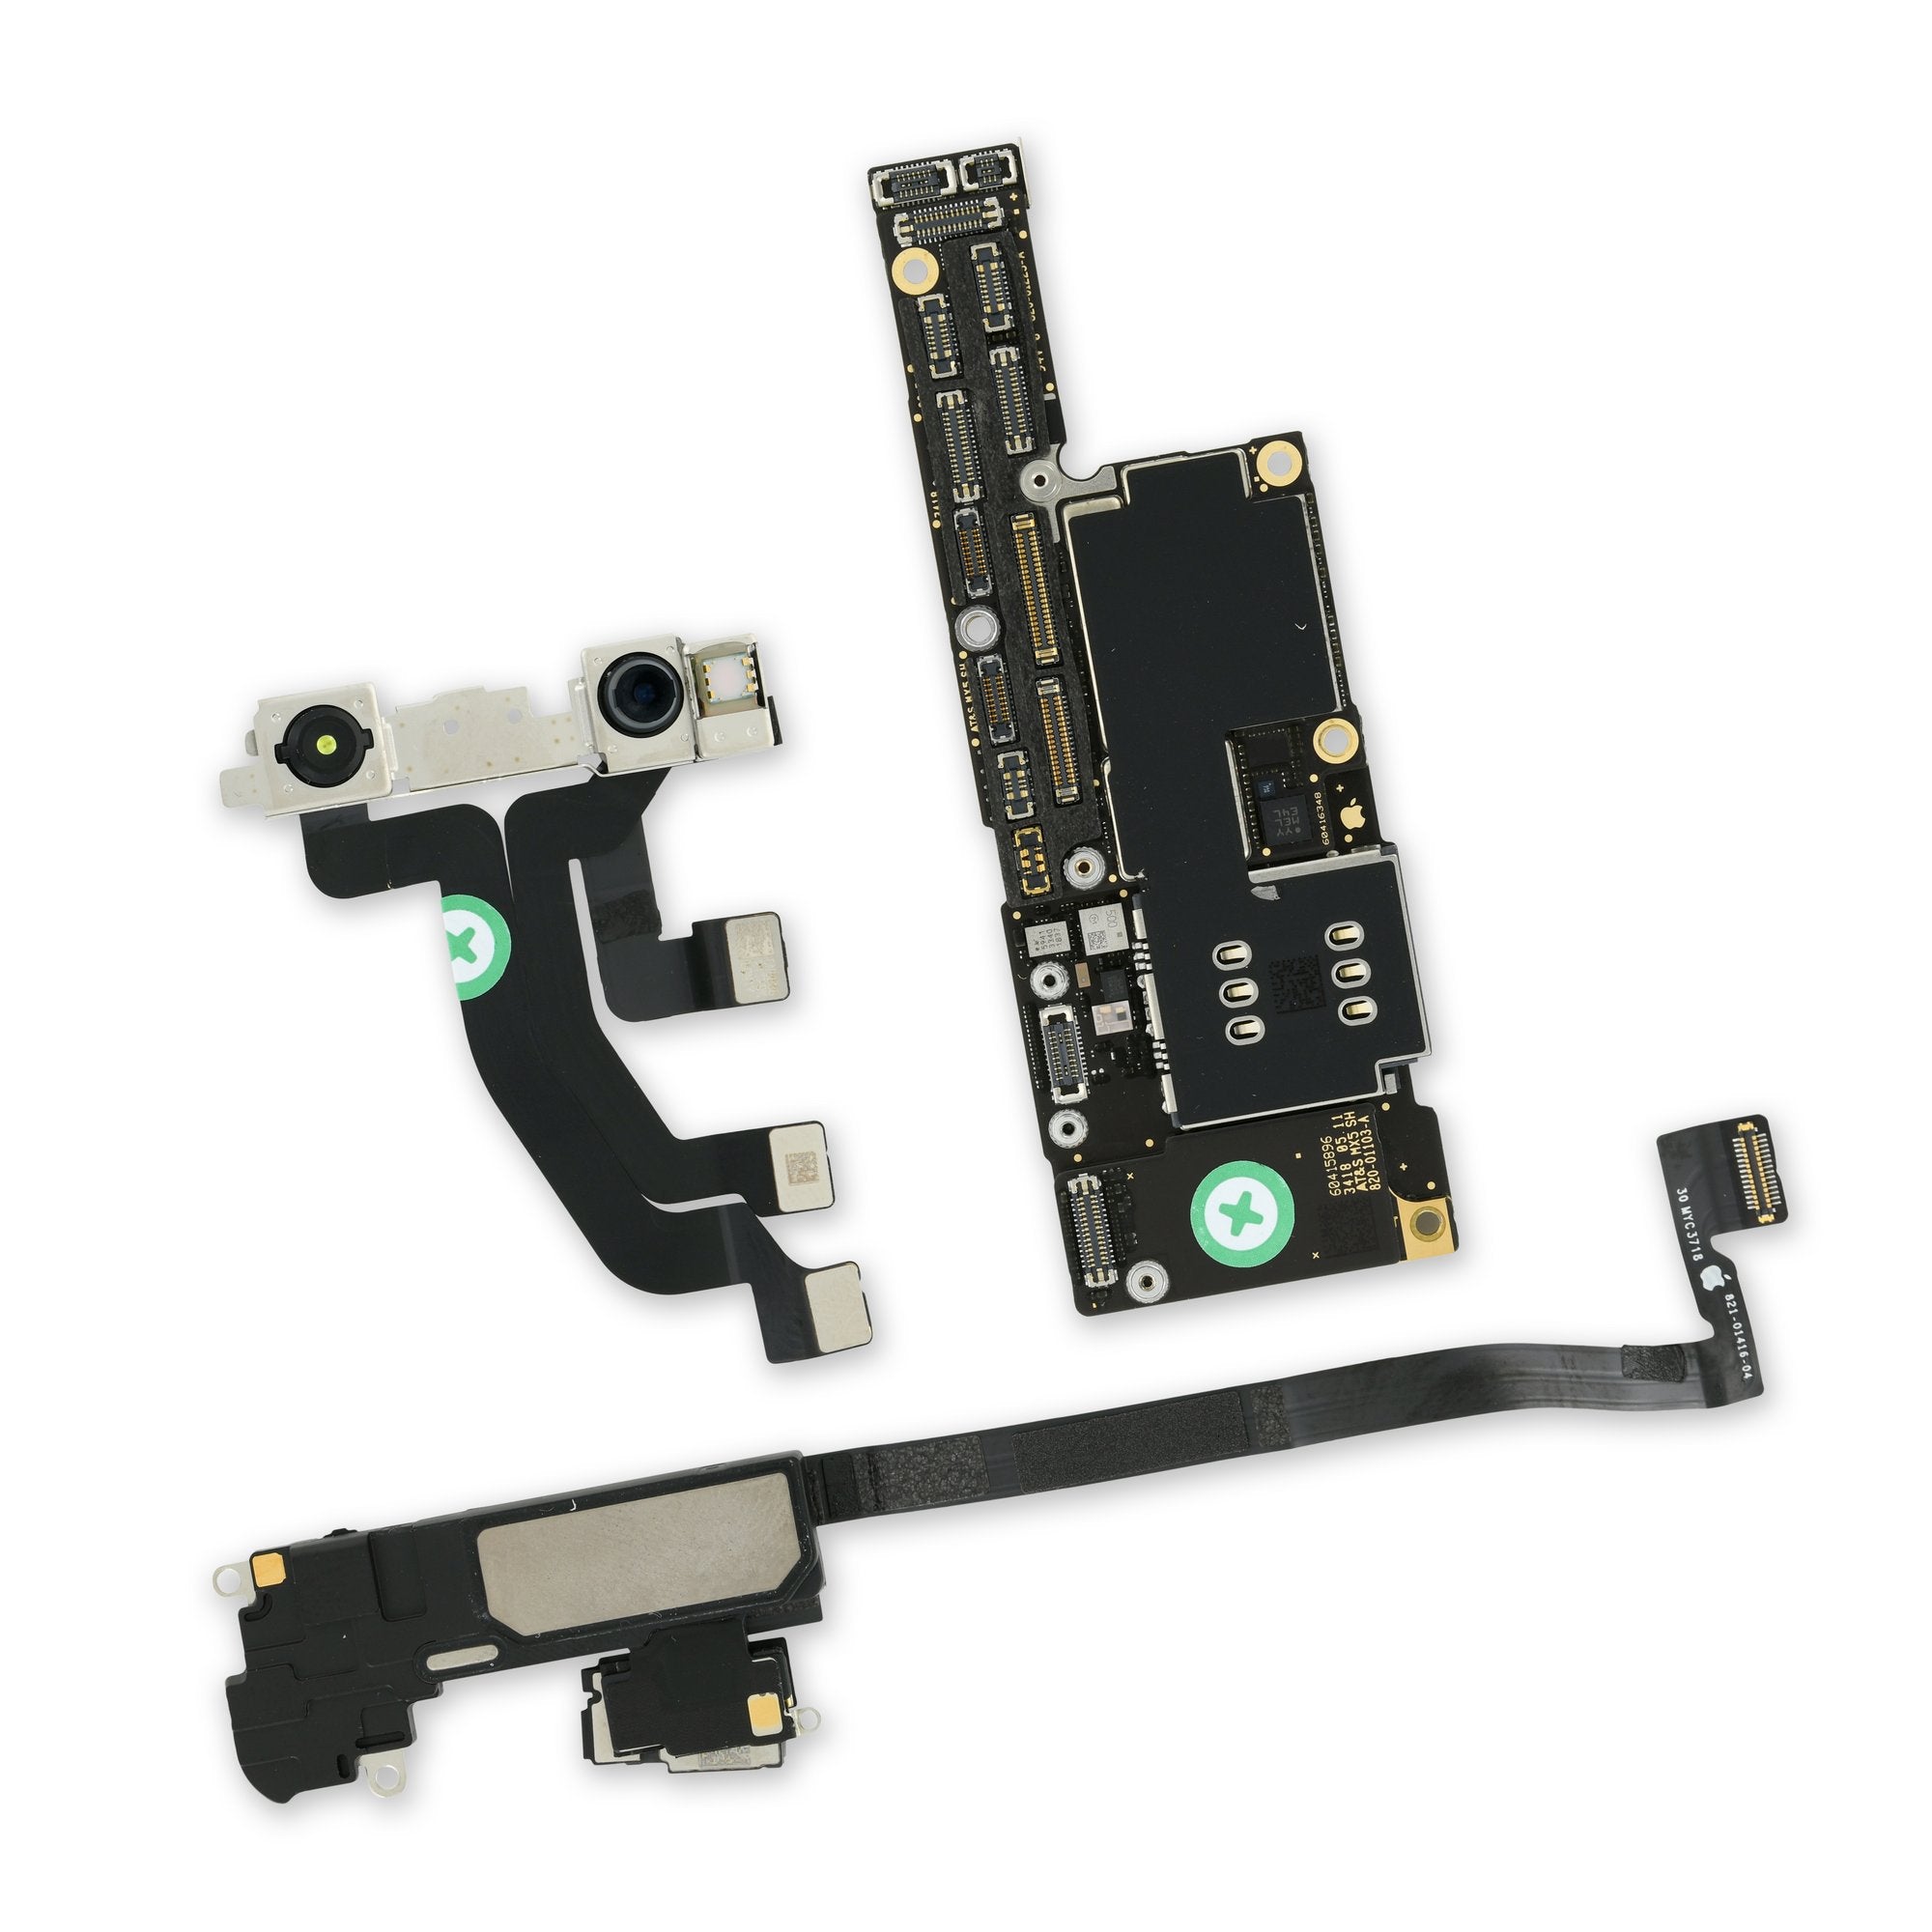 iPhone XS Max A1921 (Verizon) Logic Board with Paired Face ID Sensors